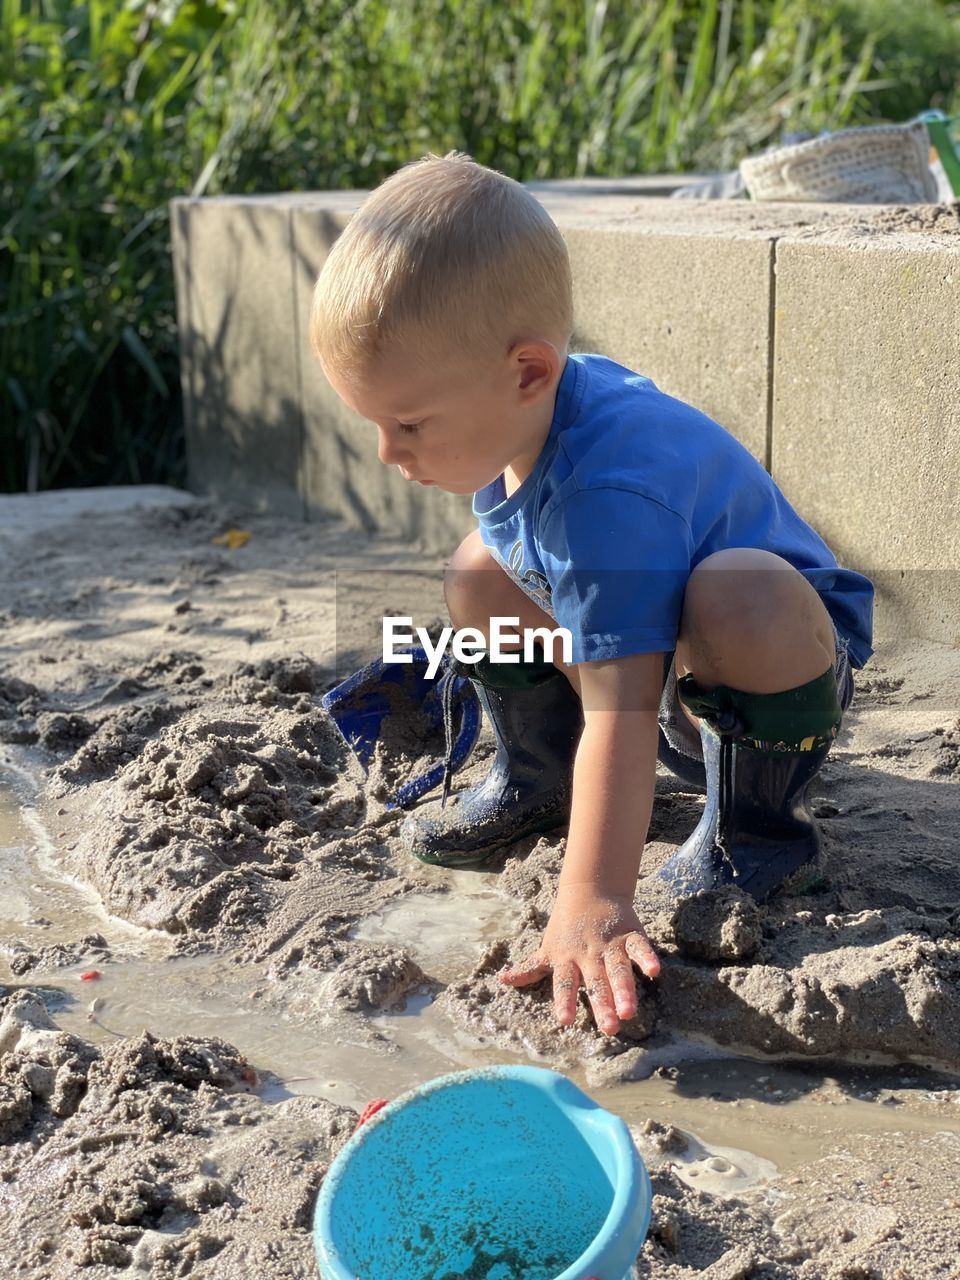 childhood, child, one person, men, full length, nature, casual clothing, day, sand, bucket, soil, innocence, land, toddler, leisure activity, lifestyles, looking, blond hair, looking down, container, outdoors, person, holding, digging, cute, sand pail and shovel, crouching, water, sunlight, summer, beach, standing